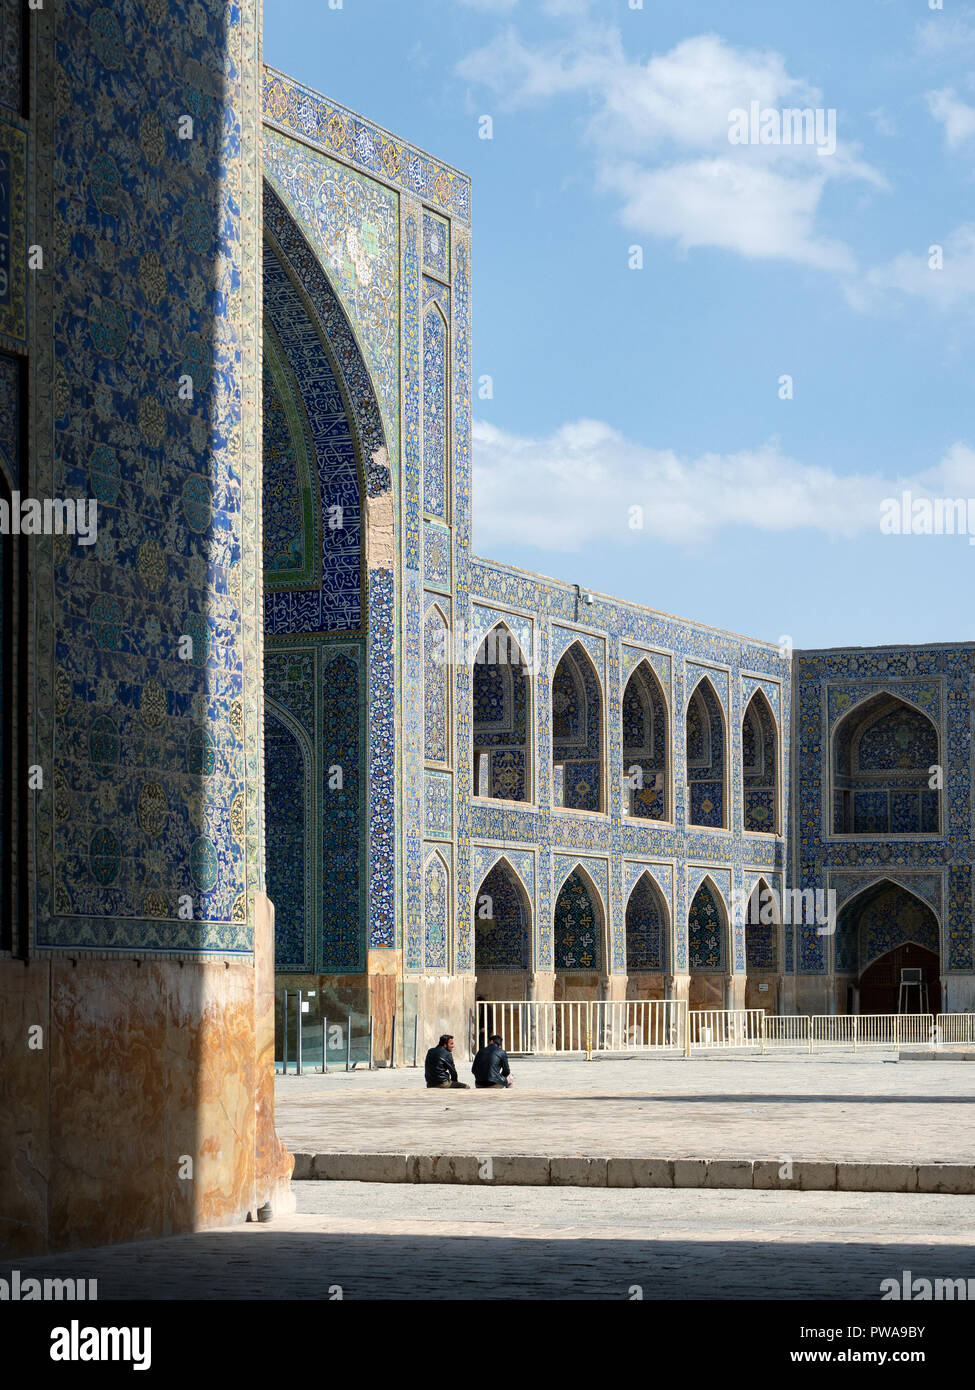 Isfahan, Iran - March 3, 2017 : two men sitting in the yard of Shah Mosque, also known as Imam Mosque. It is a UNESCO World Heritage Site Stock Photo